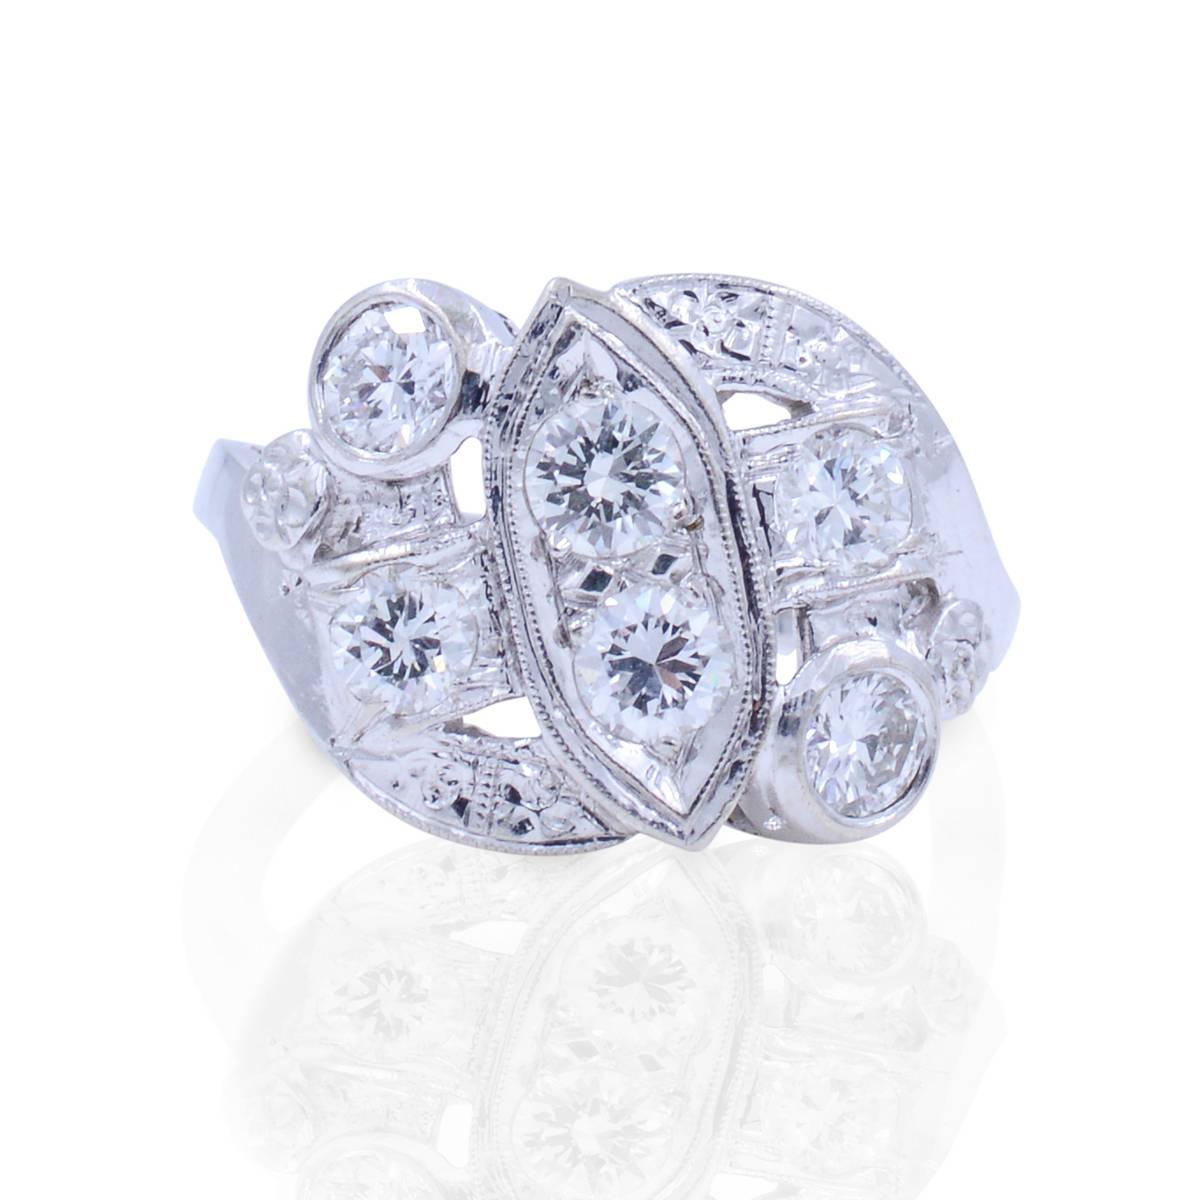 Old European Cut Edwardian Cluster Diamond Ring in Platinum with Old European Round Cuts